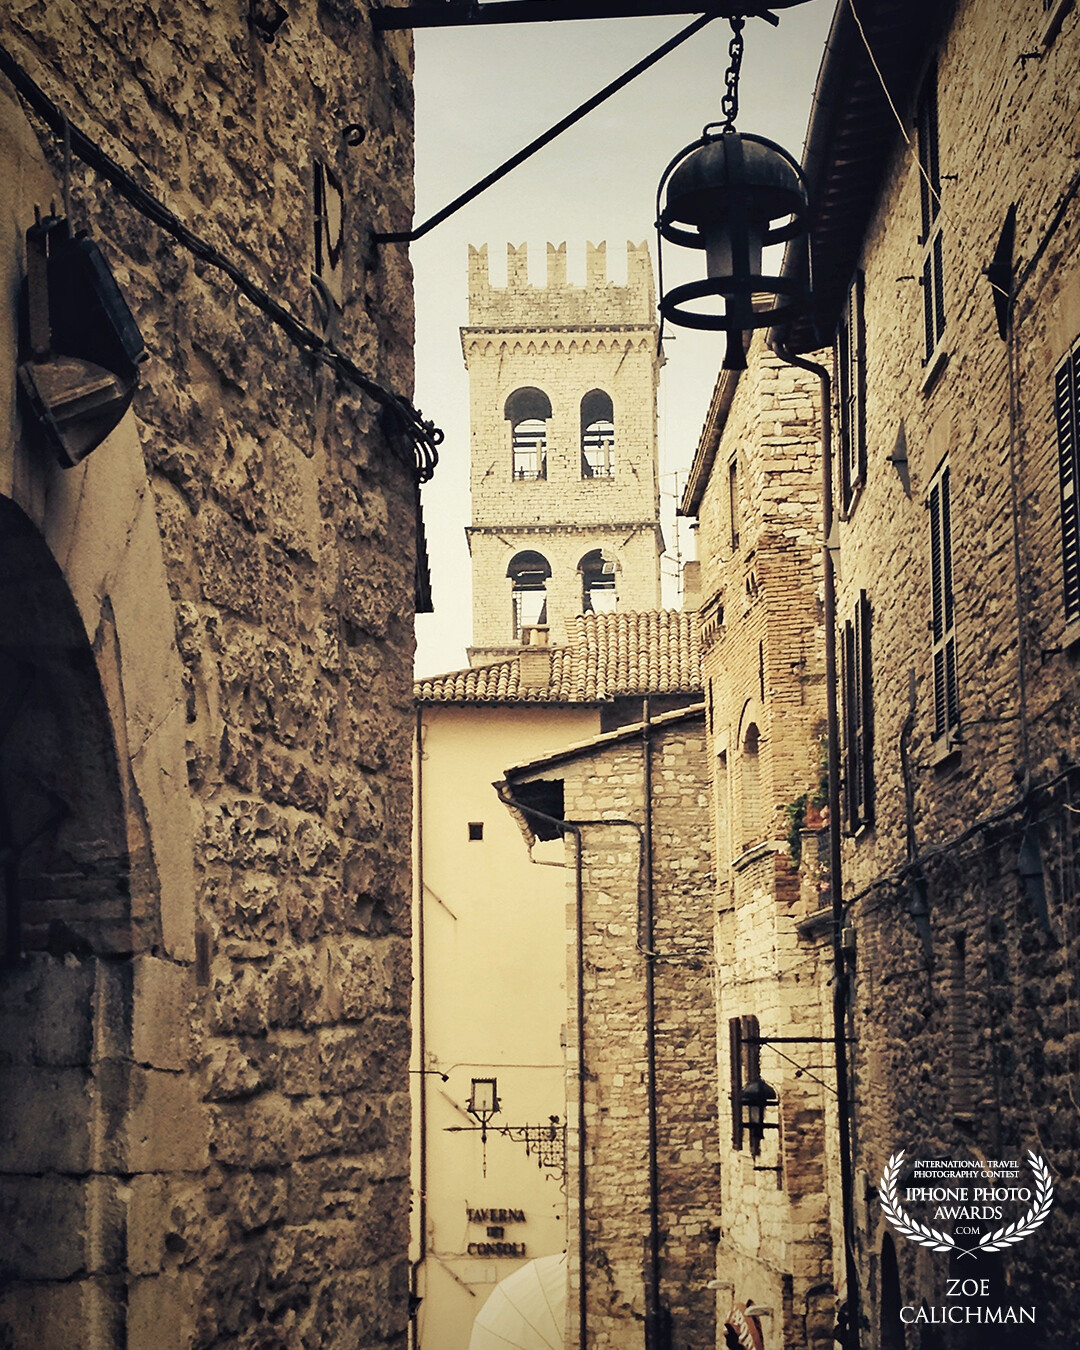 Peeked into an ally in Assisi in the Umbria region, Italy.